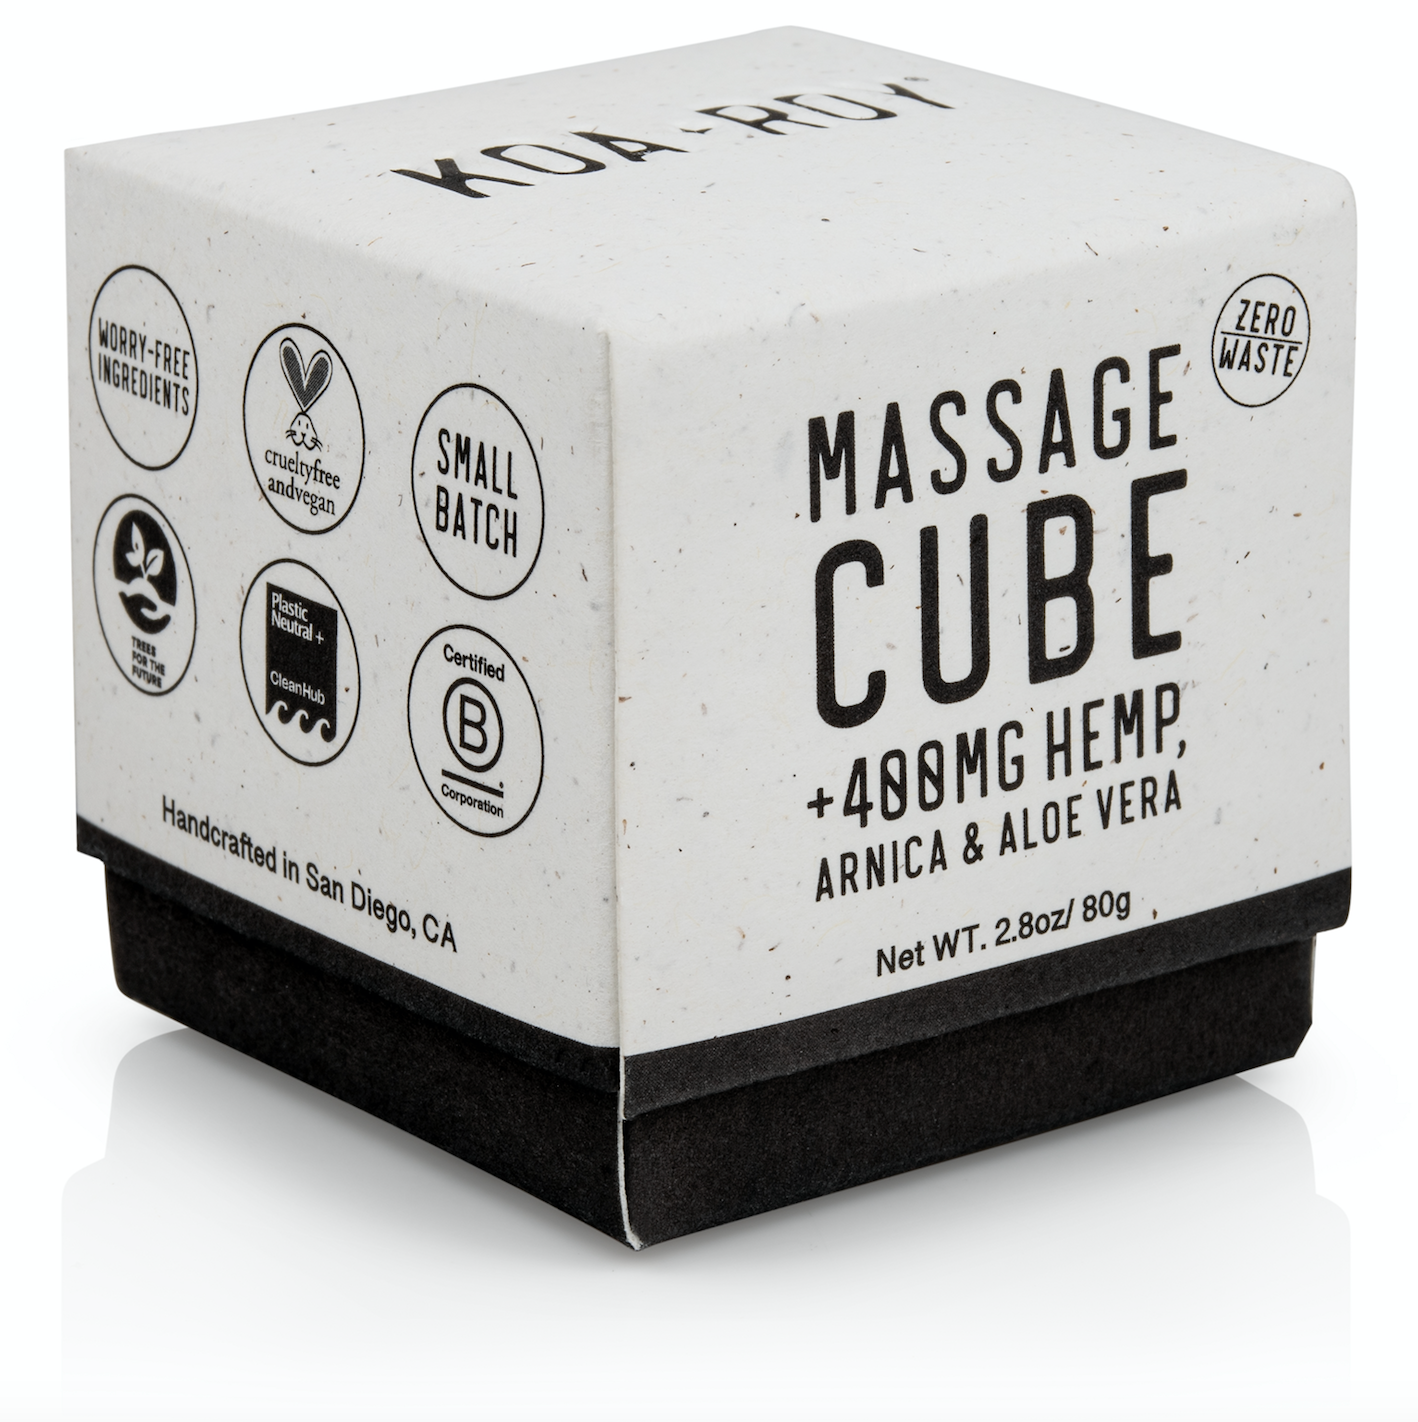 Massage Cube + CBD Zero waste packaging, B Corp Certified, Cruelty Free and vegan made in San Diego, CA